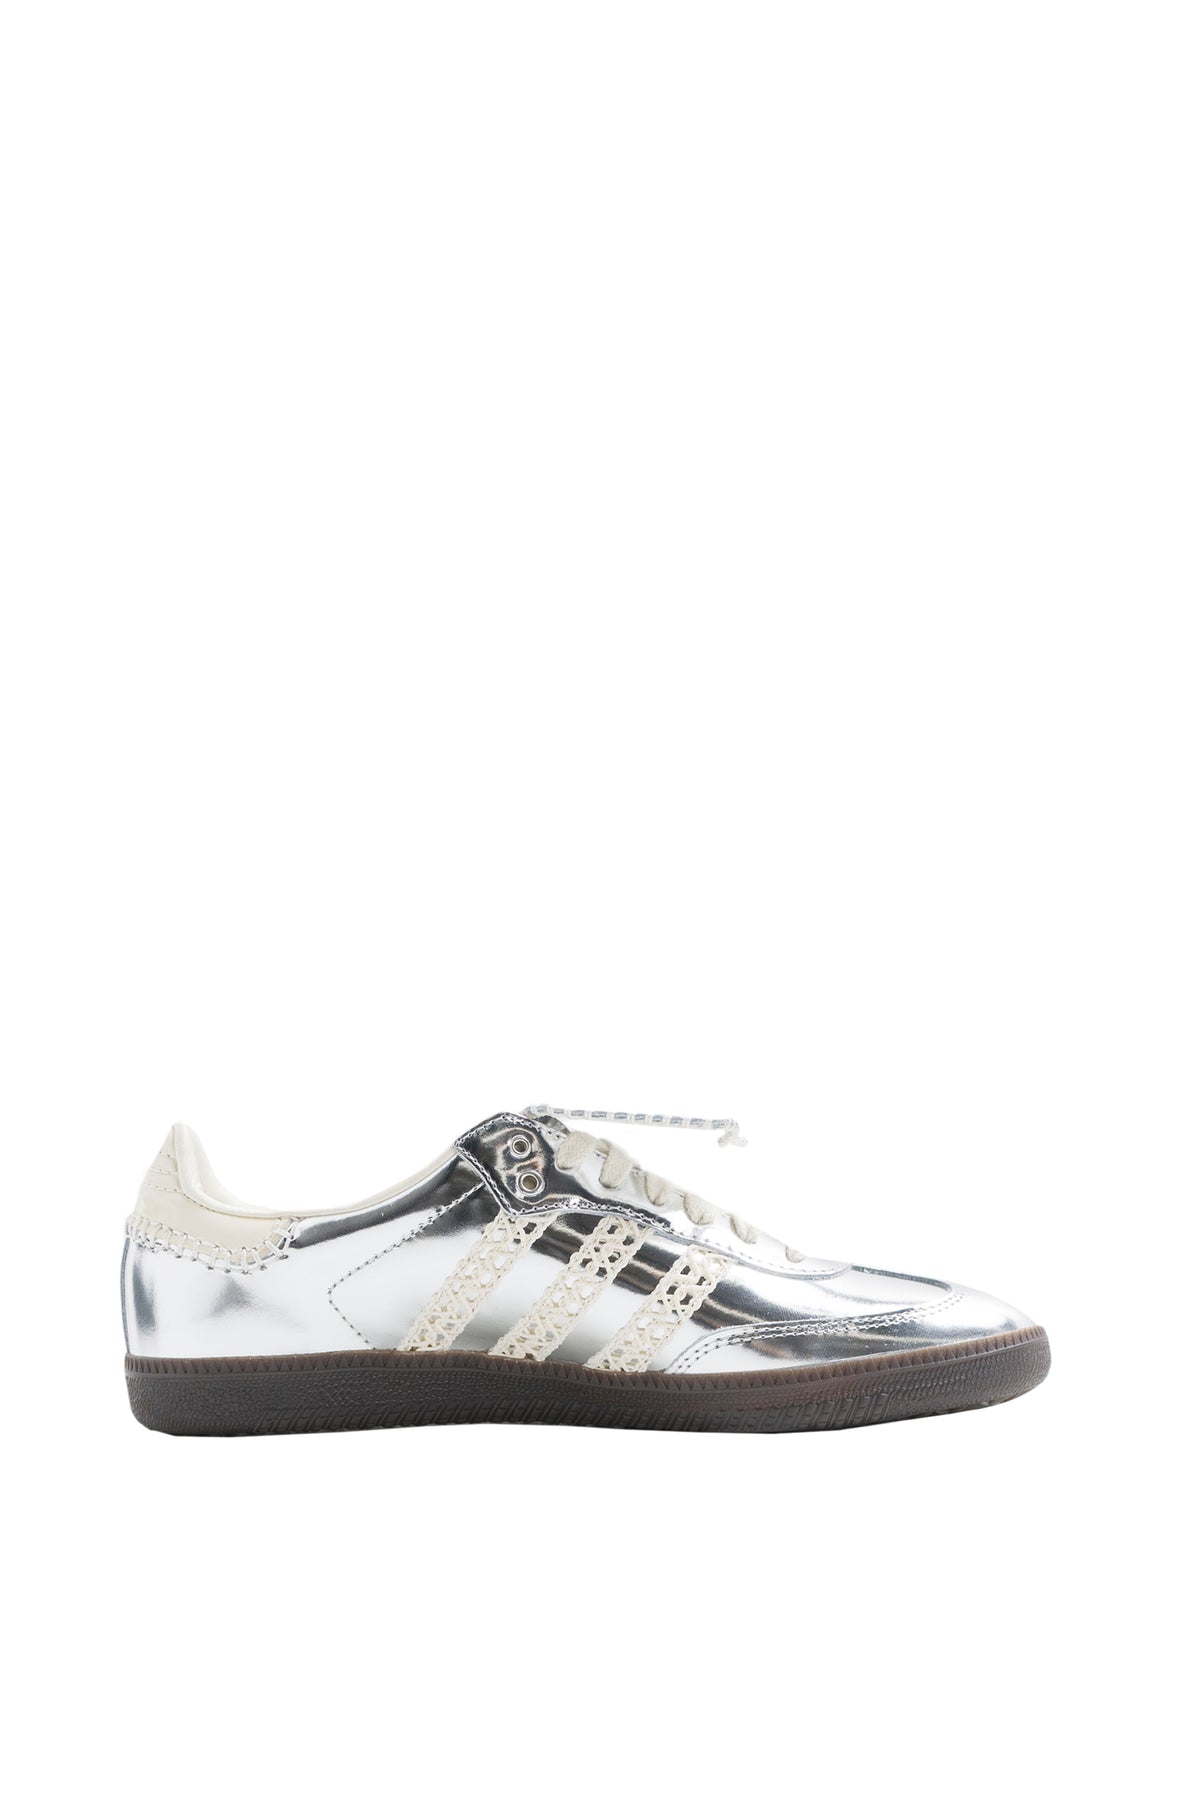 WB SILVER SAMBA / SIL MET/CWHT/GRY ONE